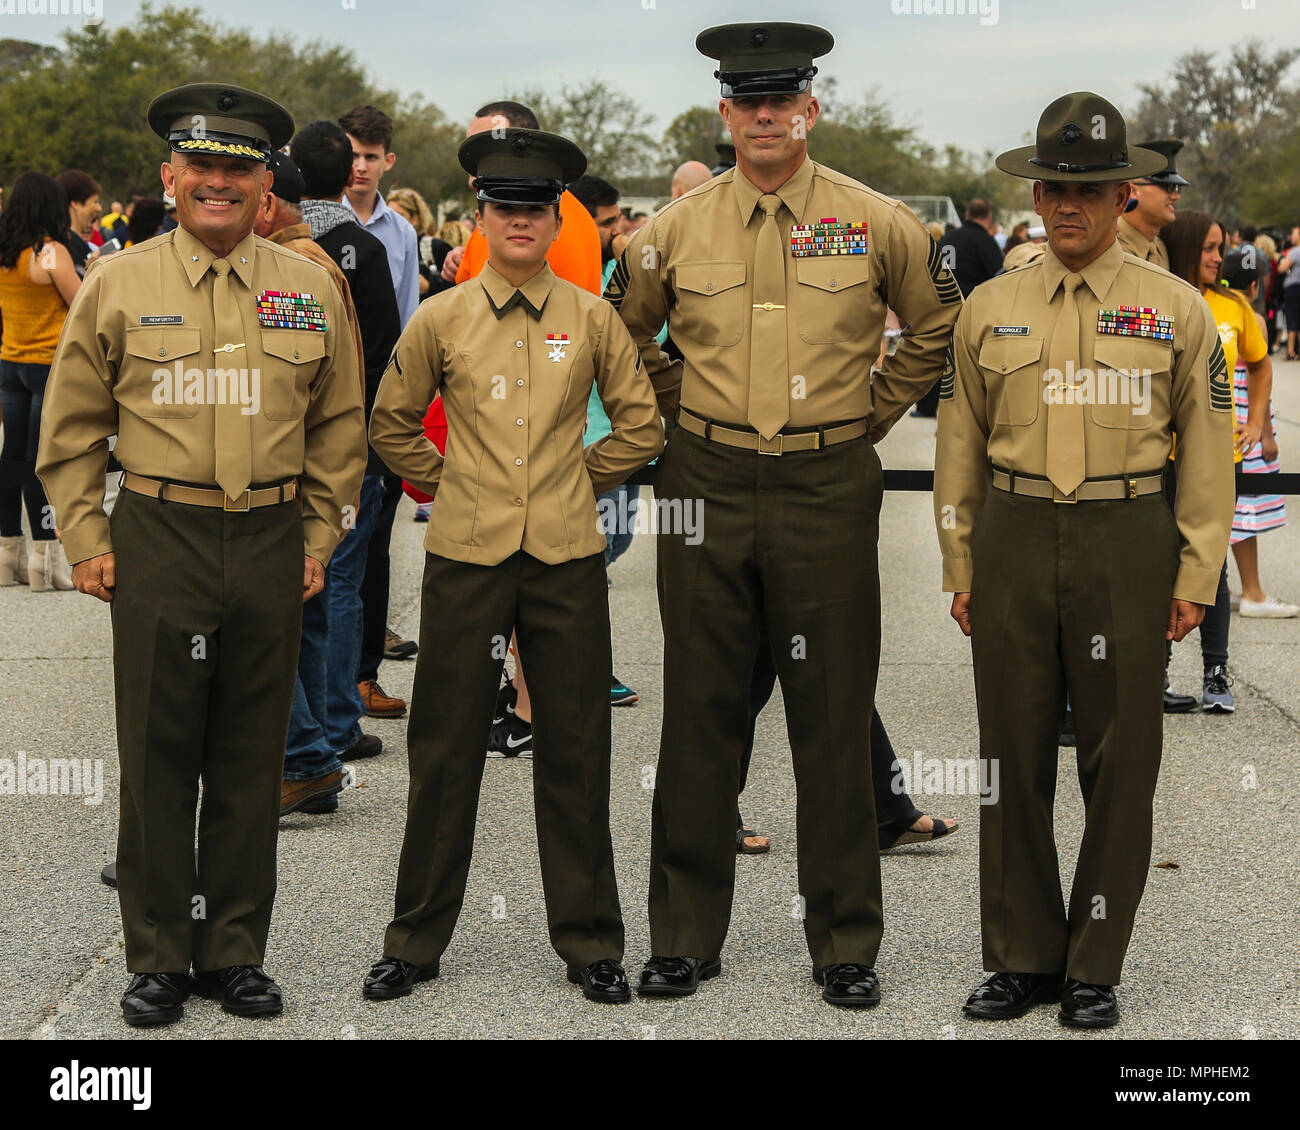 (From left to right) U.S. Marine Corps Brig. Gen. Austin Renforth, commanding general of Marine Corps Recruit Depot Parris Island/Eastern Recruiting Region, Pfc. Madeline Kreamer, Sgt. Maj. Howard Kreamer, the sergeant major of 2nd Marine Aircraft Wing, and Sgt. Maj. Rafael Rodriguez, Marine Corps Recruit Depot Parris Island/Eastern Recruiting Region Sergeant Major, pose for a photo after a graduation ceremony on Marine Corps Recruit Depot, Parris Island, S.C., March 10, 2017. The ceremony is conducted to honor the new Marines. (U.S. Marine Corps photo by Lance Cpl. Colby Cooper/released) Stock Photo